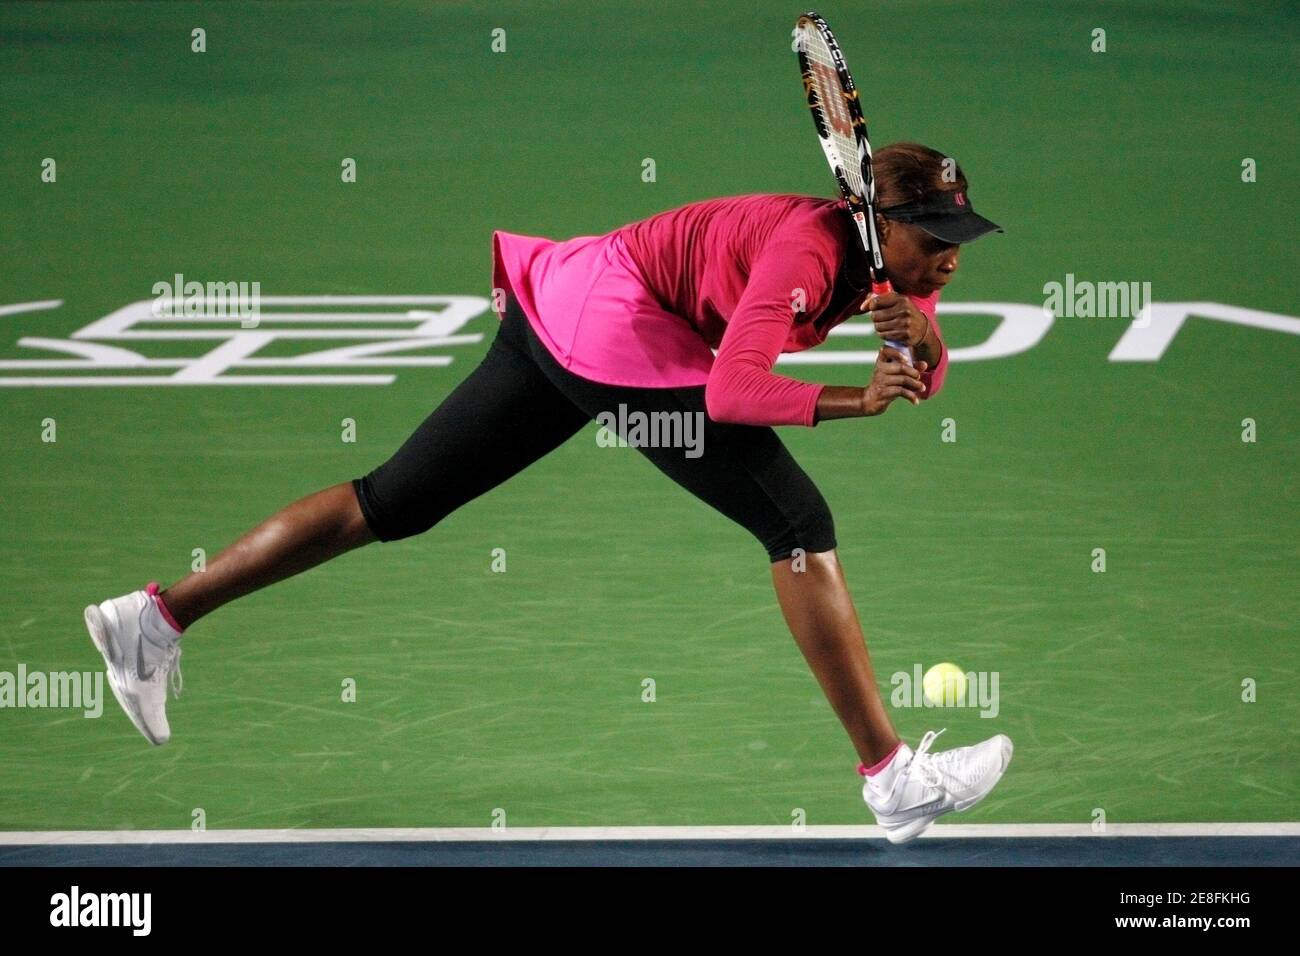 Venus Williams of the U.S. returns a shot to Caroline Wozniacki of Denmark during their match on the second day of the Tennis Classic in Hong Kong January 7, 2010.  REUTERS/Tyrone Siu    (CHINA - Tags: SPORT TENNIS) Stock Photo